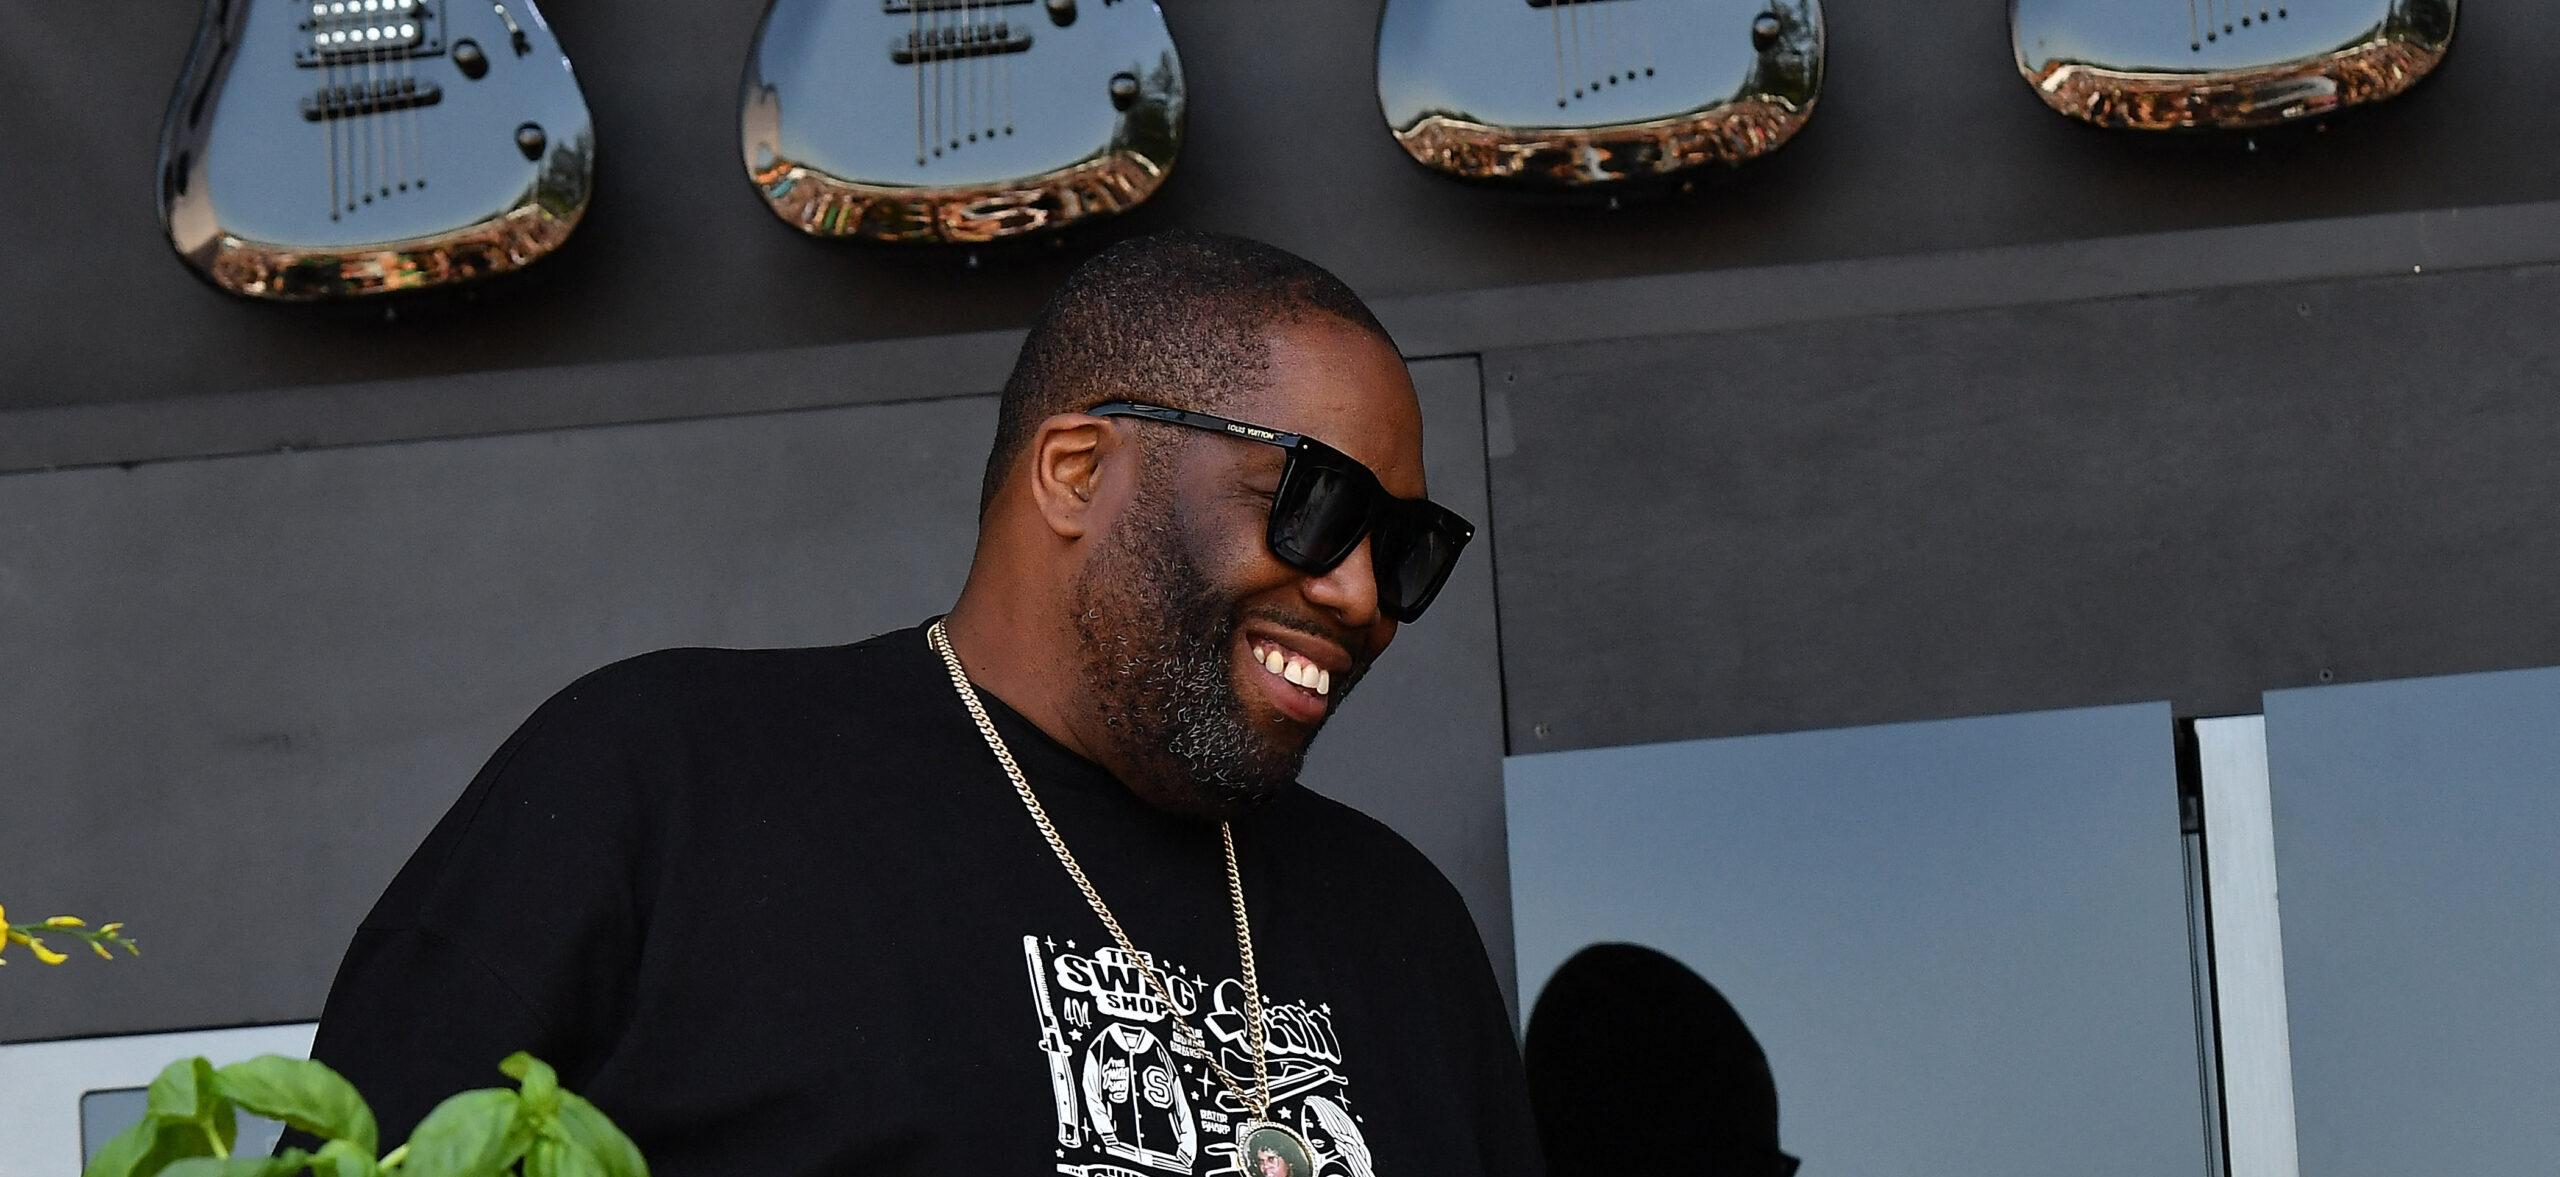 Killer Mike Brushes Grammys Arrest Aside, Says He’s Confident He Will Be ‘Cleared Of All Wrongdoing’